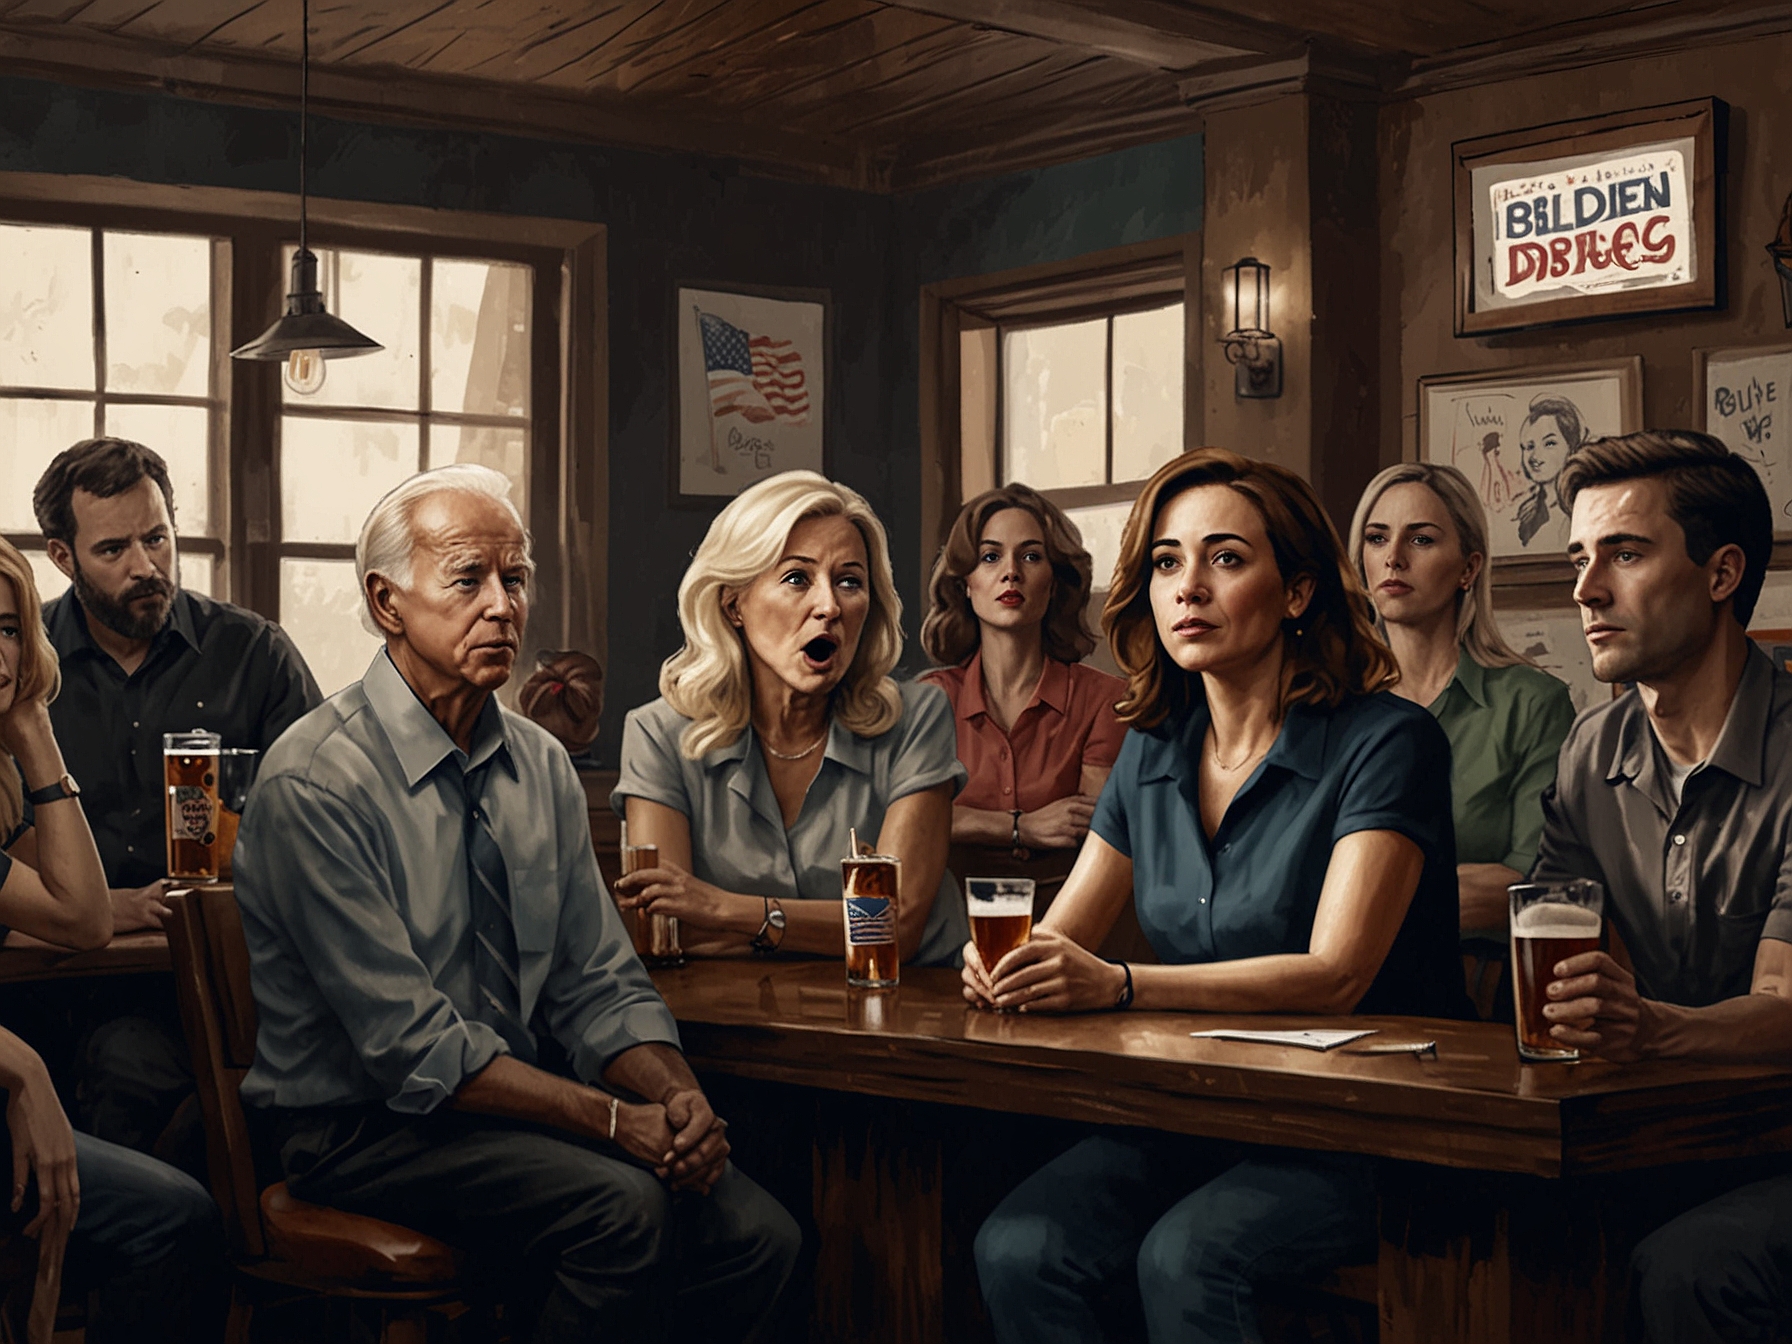 A group of people in a bar watching the Biden vs. Trump debate, with mixed emotions on their faces. Biden supporters look concerned and disappointed, reflecting the overall sentiment of the article.